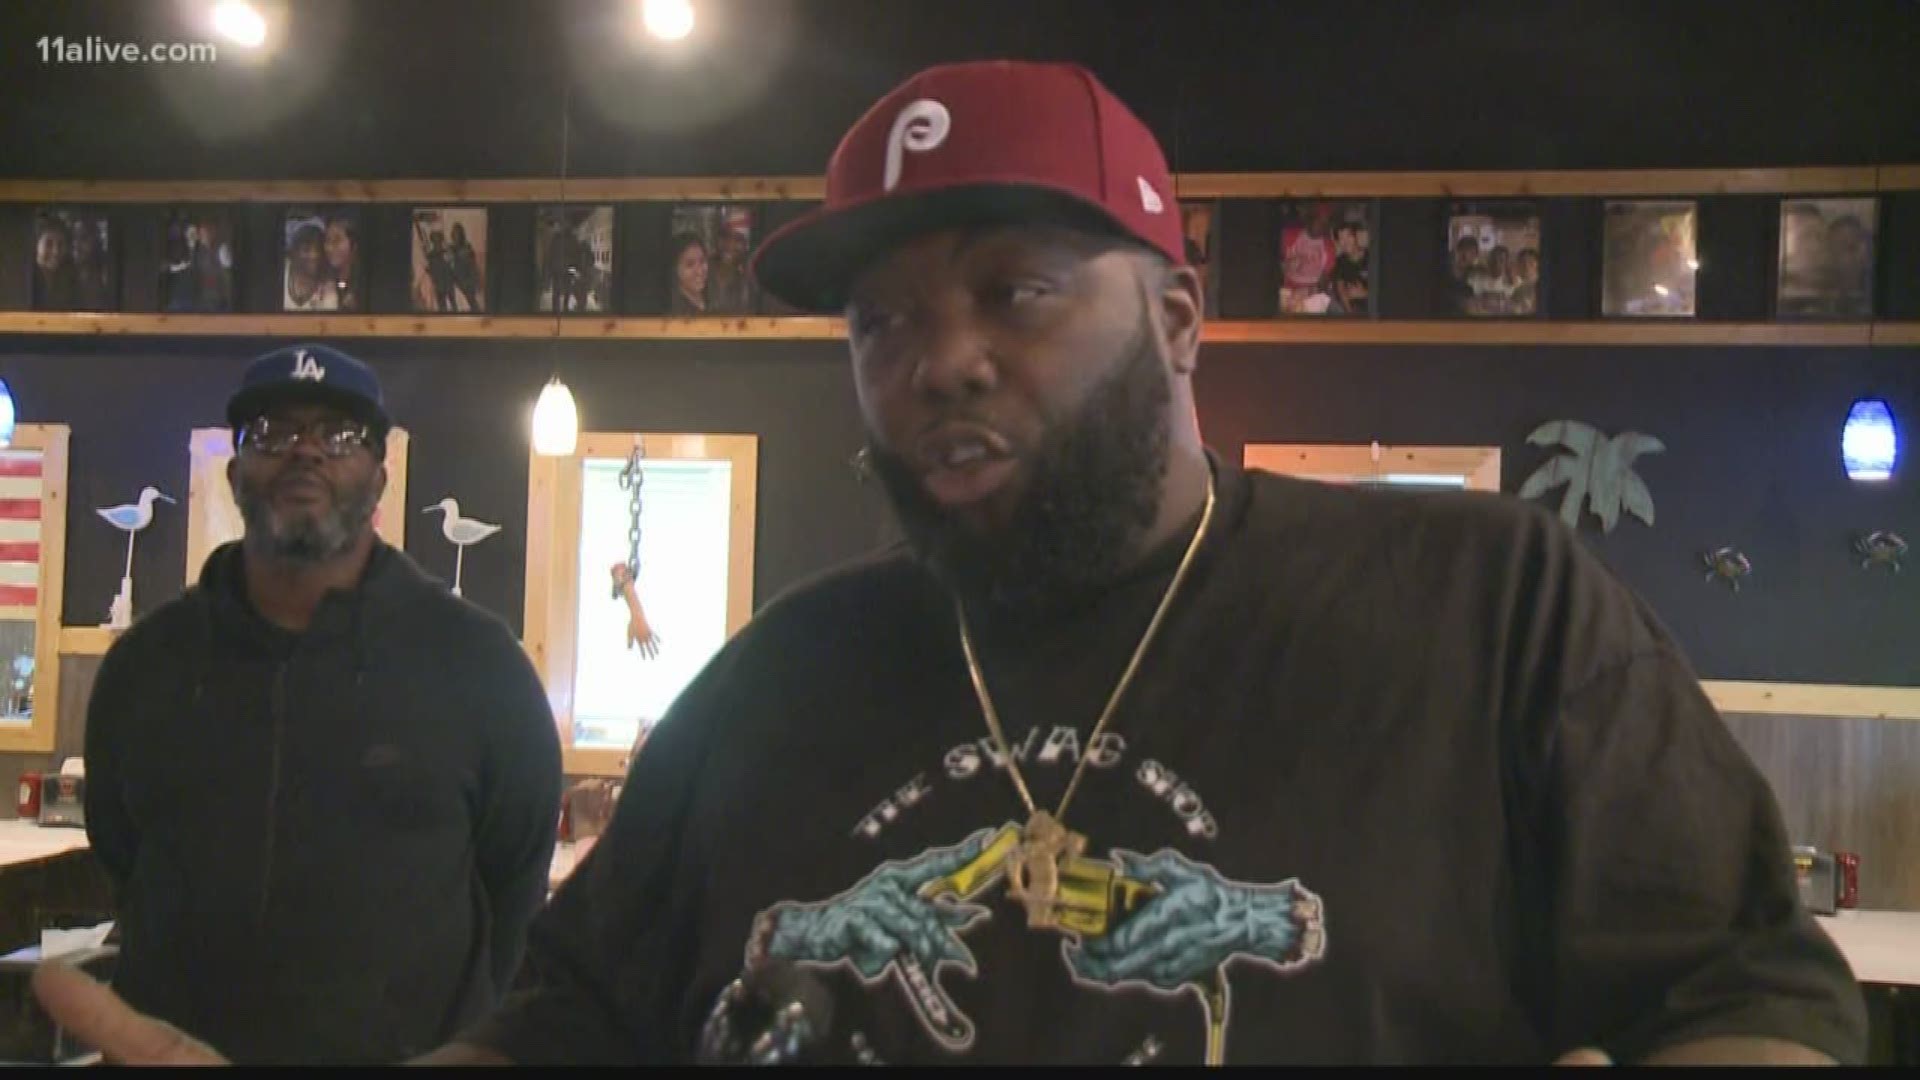 Killer Mike said this summer he saw a roach -- and posted to social media.